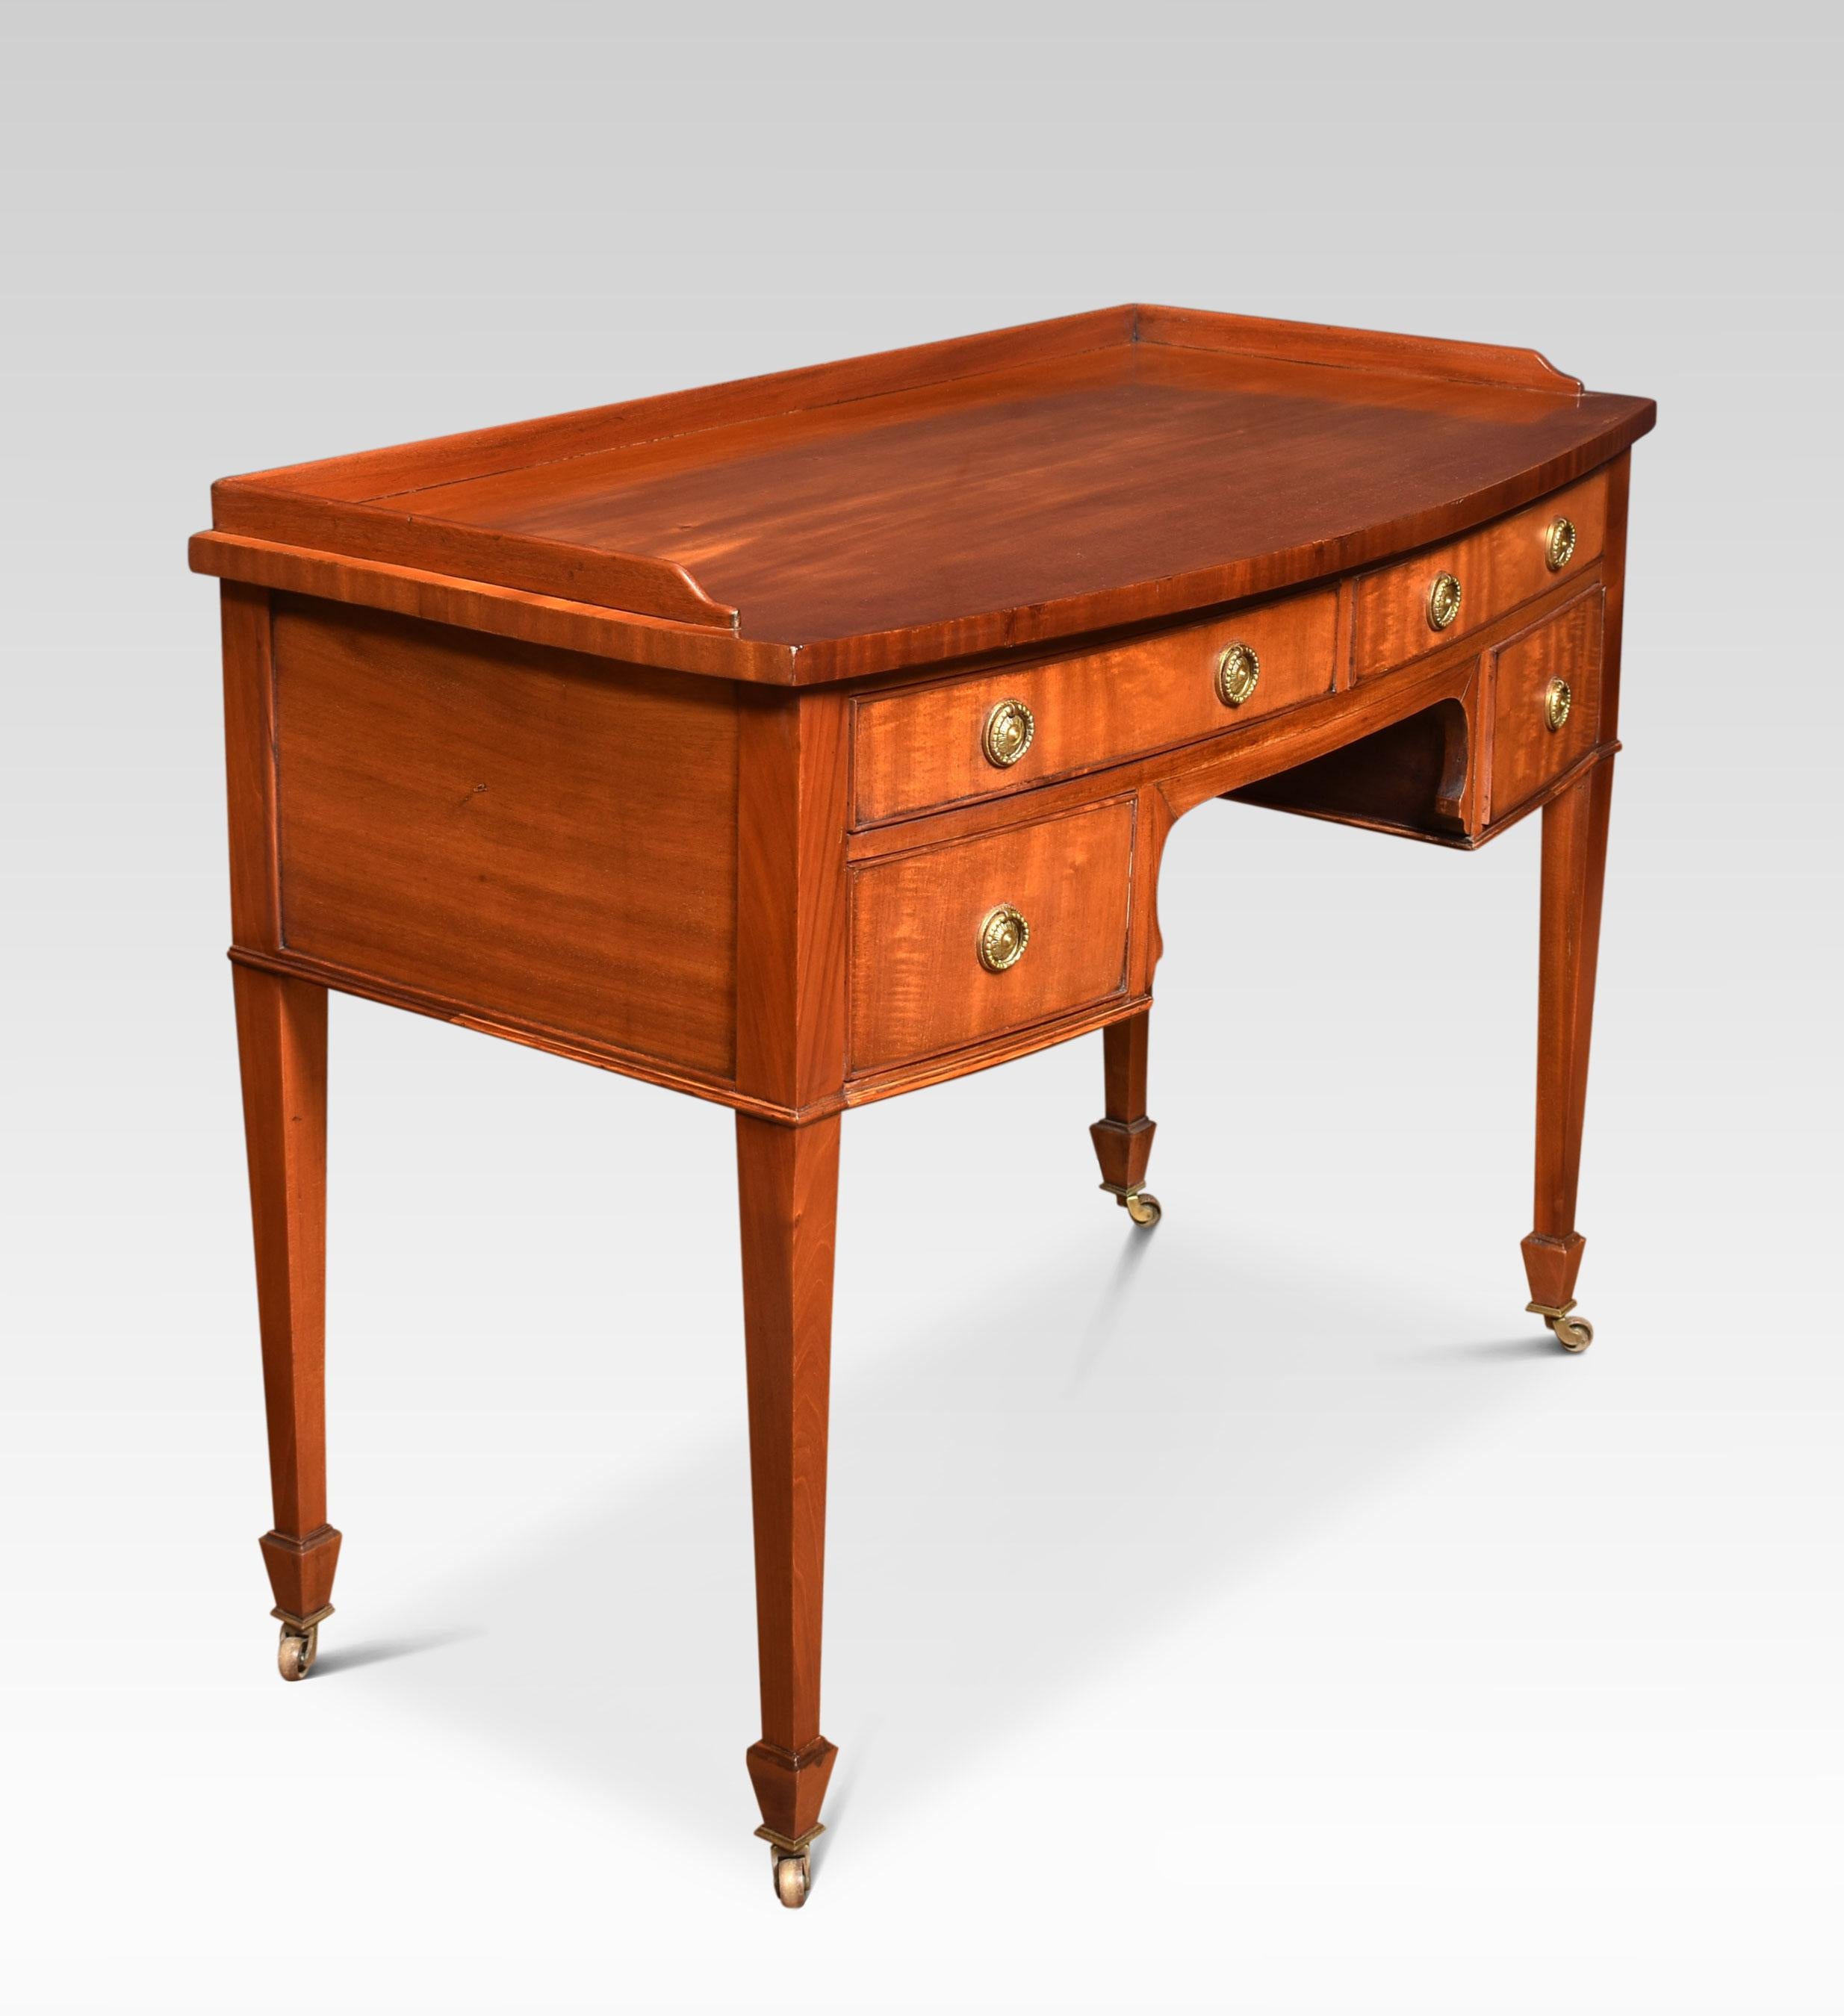 Mahogany writing table, the rectangular top with a raised three-quarter gallery. Above an arrangement of drawers with brass handles. All raised on four tapering supports terminating in brass casters.
Dimensions
Height 32 inches height of kneehole